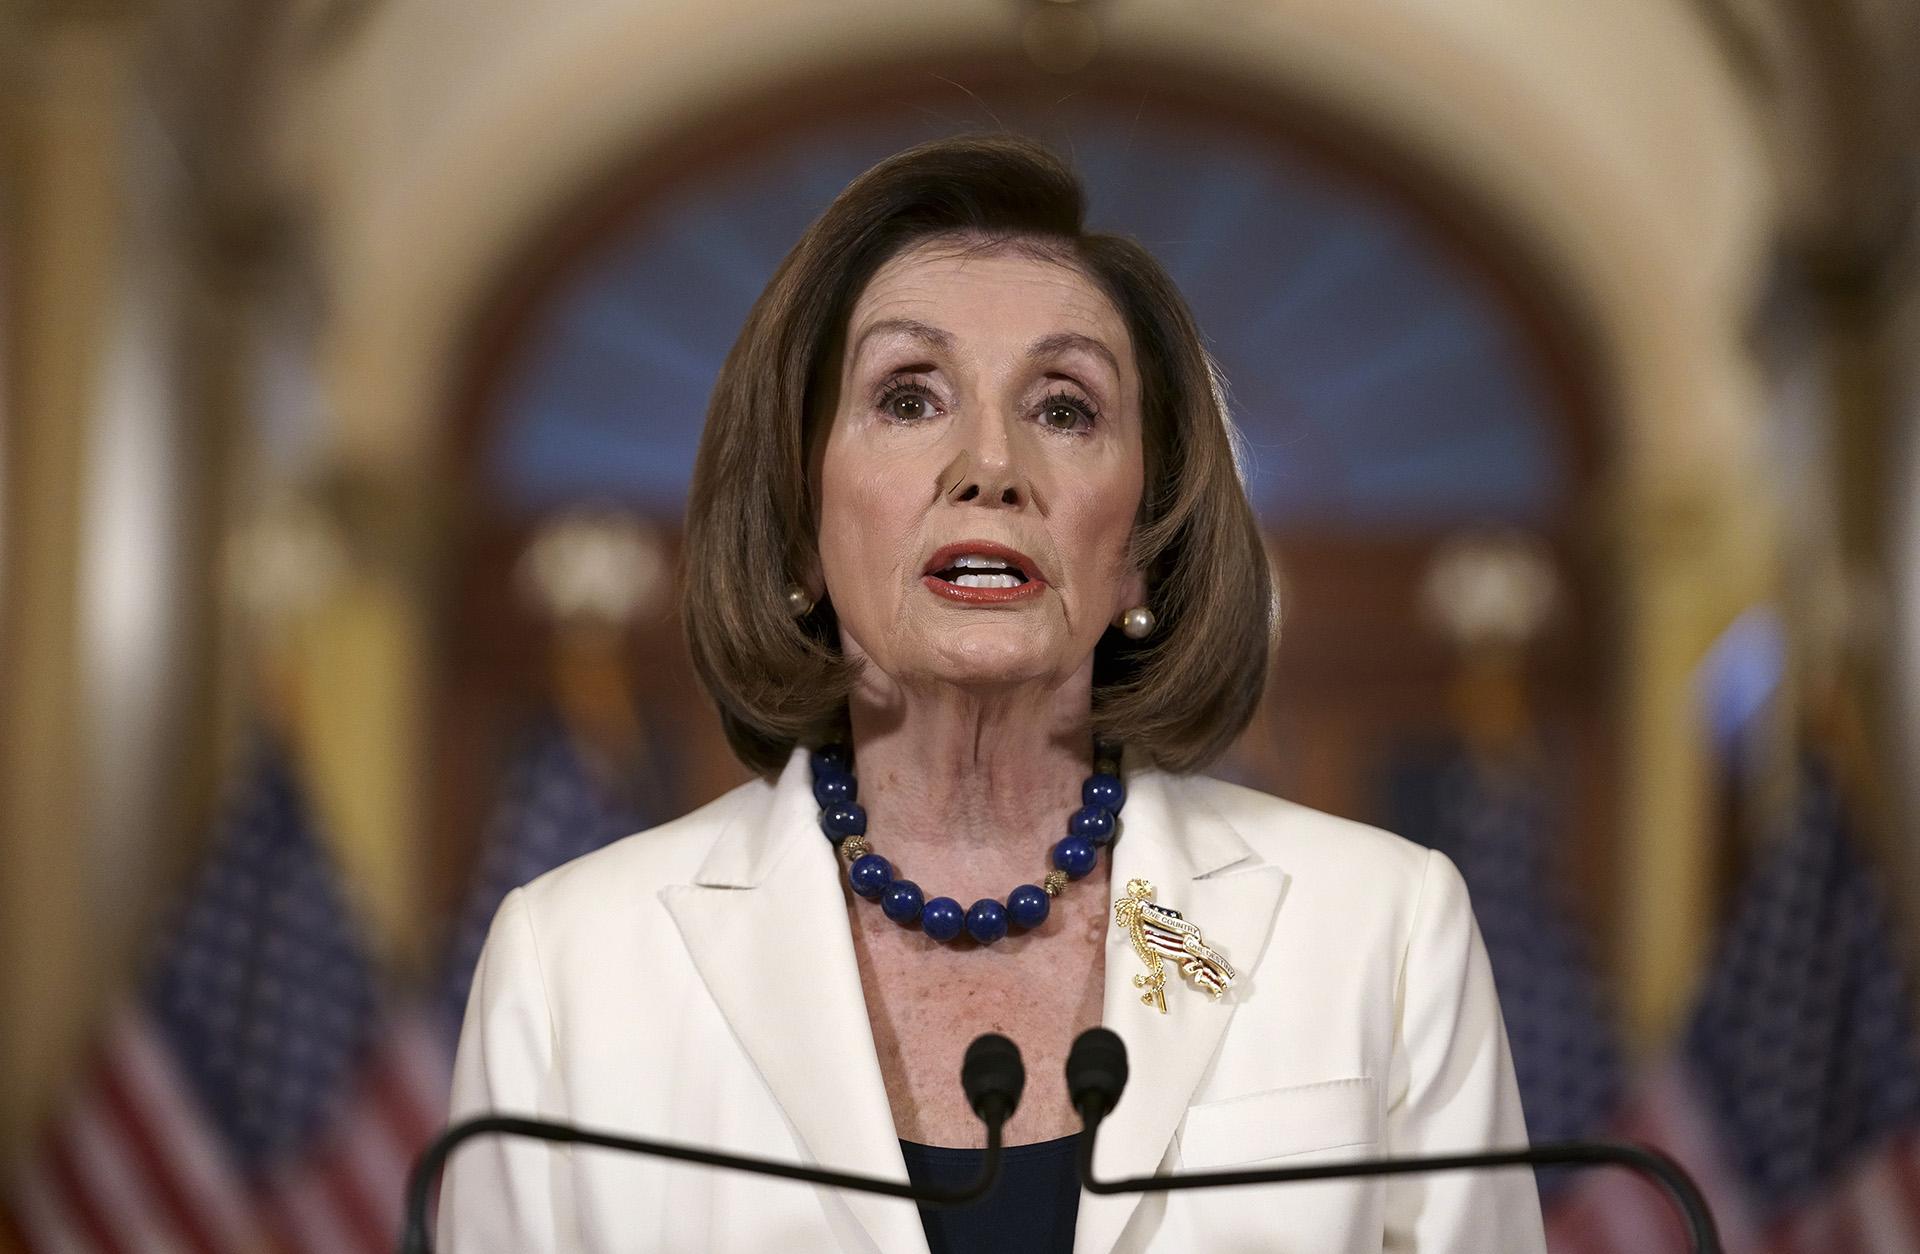 Speaker of the House Nancy Pelosi, D-Calif., makes a statement at the Capitol in Washington, Thursday, Dec. 5, 2019. Pelosi says the House is drafting articles of impeachment against President Donald Trump.   (AP Photo / J. Scott Applewhite)